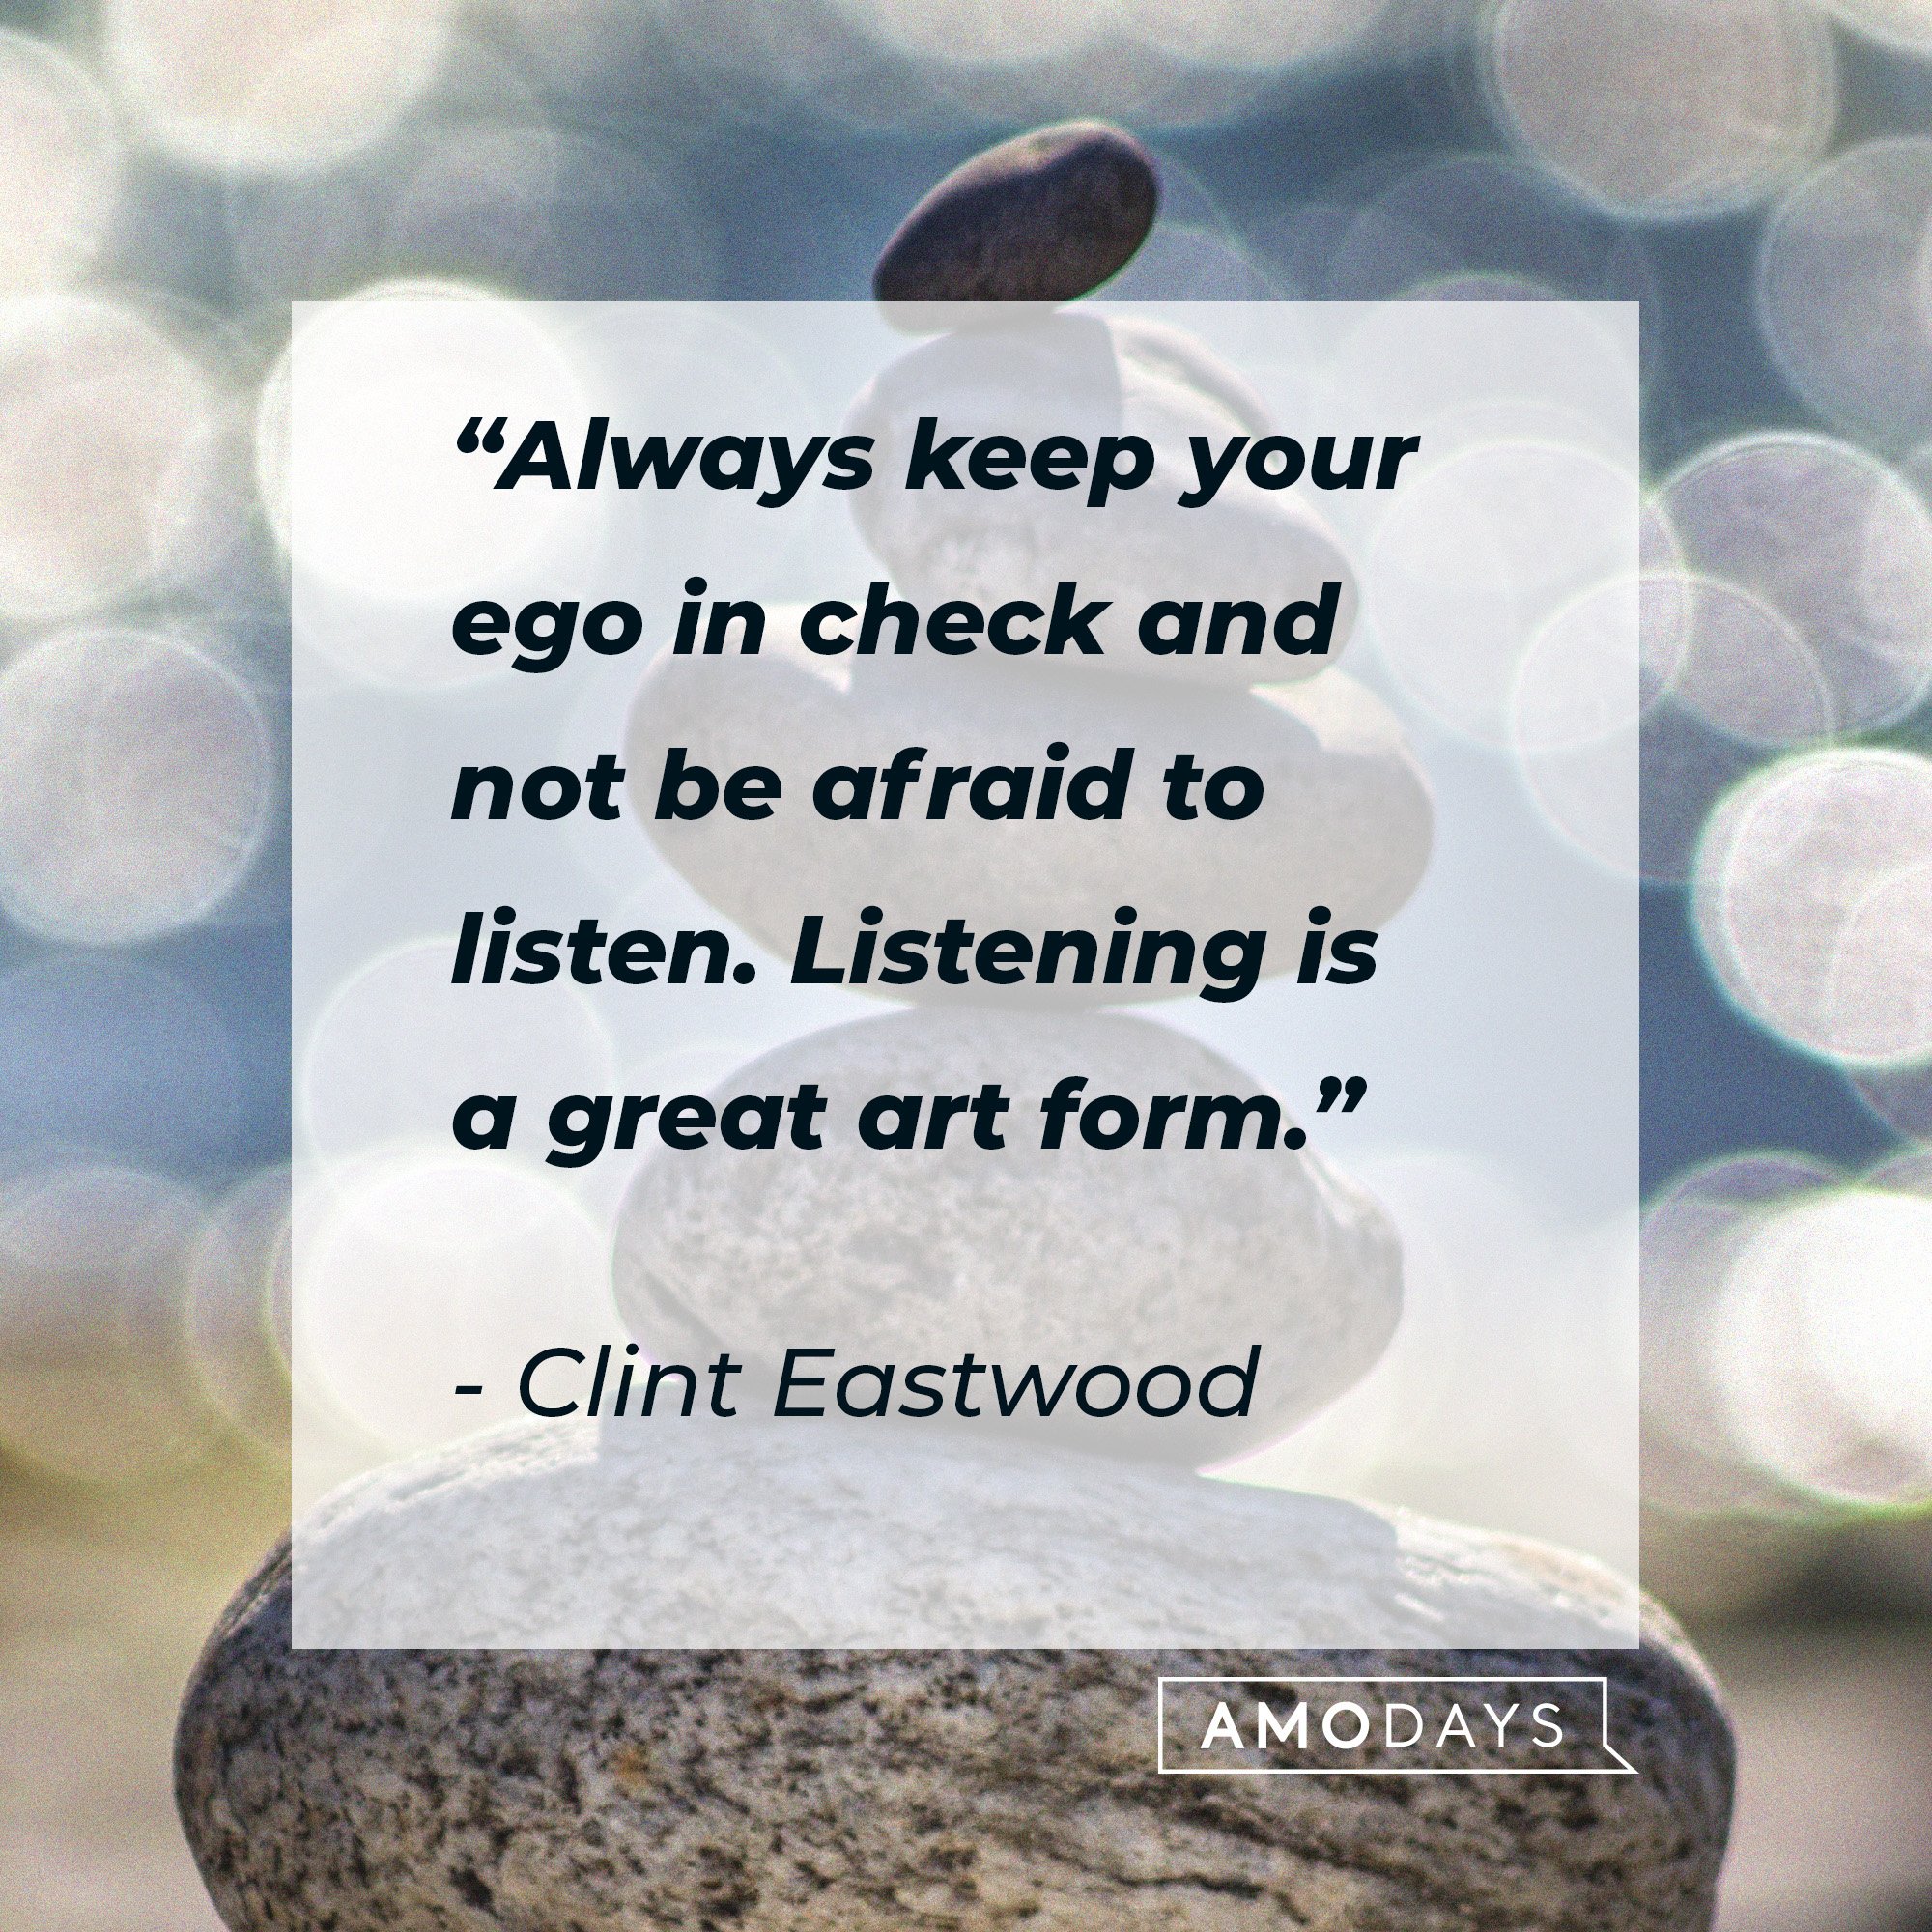 Clint Eastwood's quote: “Always keep your ego in check and not be afraid to listen. Listening is a great art form.”  | Image: AmoDays